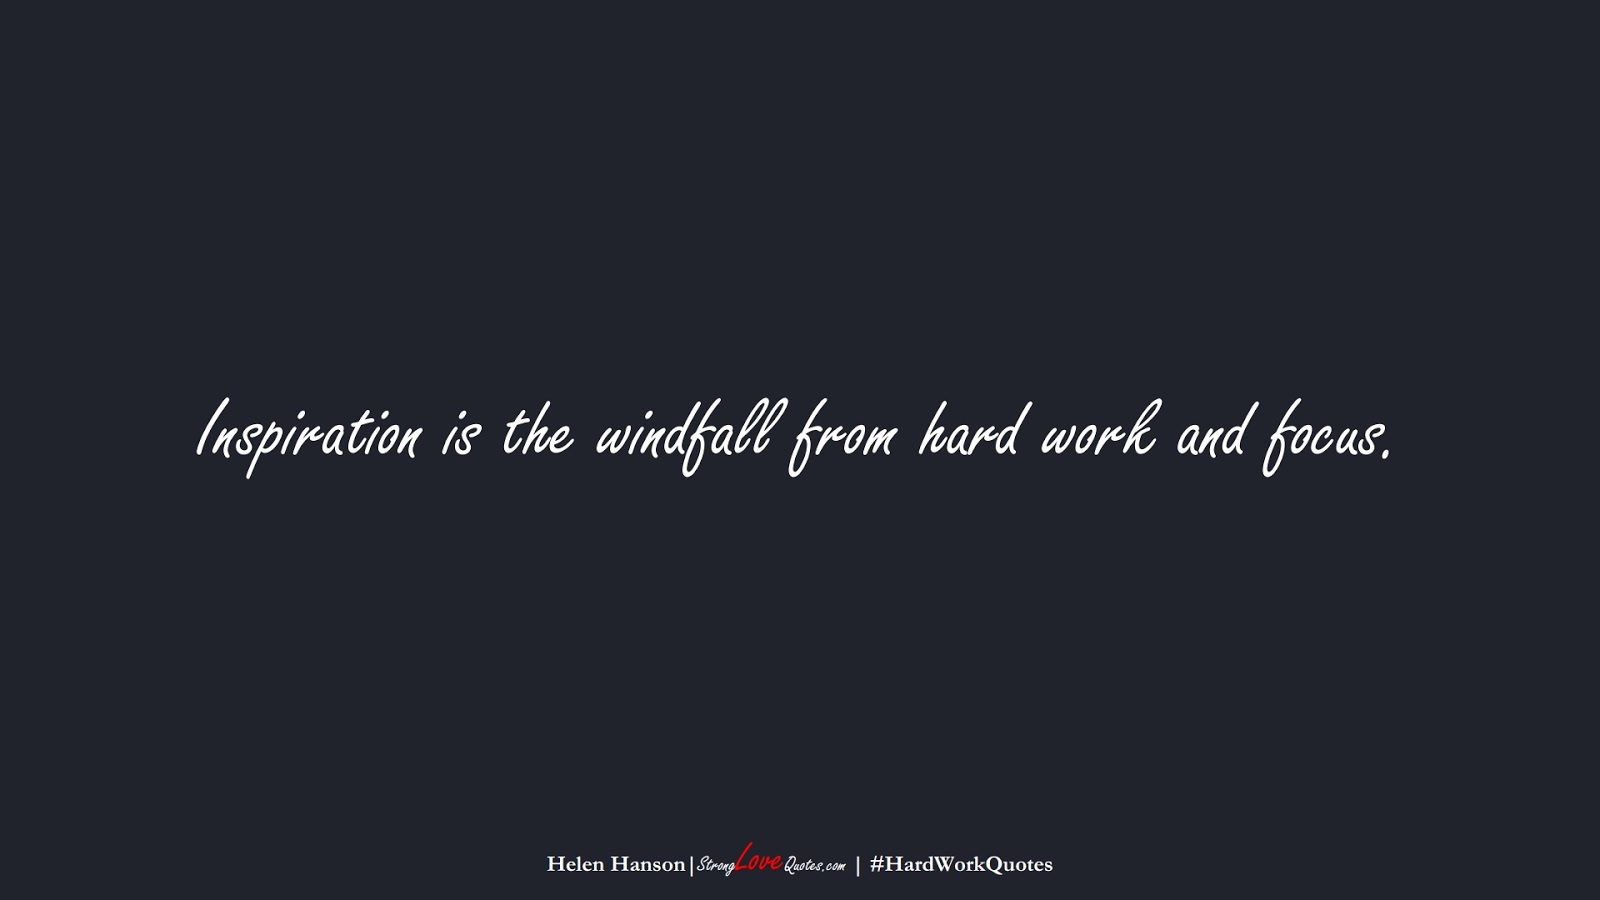 Inspiration is the windfall from hard work and focus. (Helen Hanson);  #HardWorkQuotes